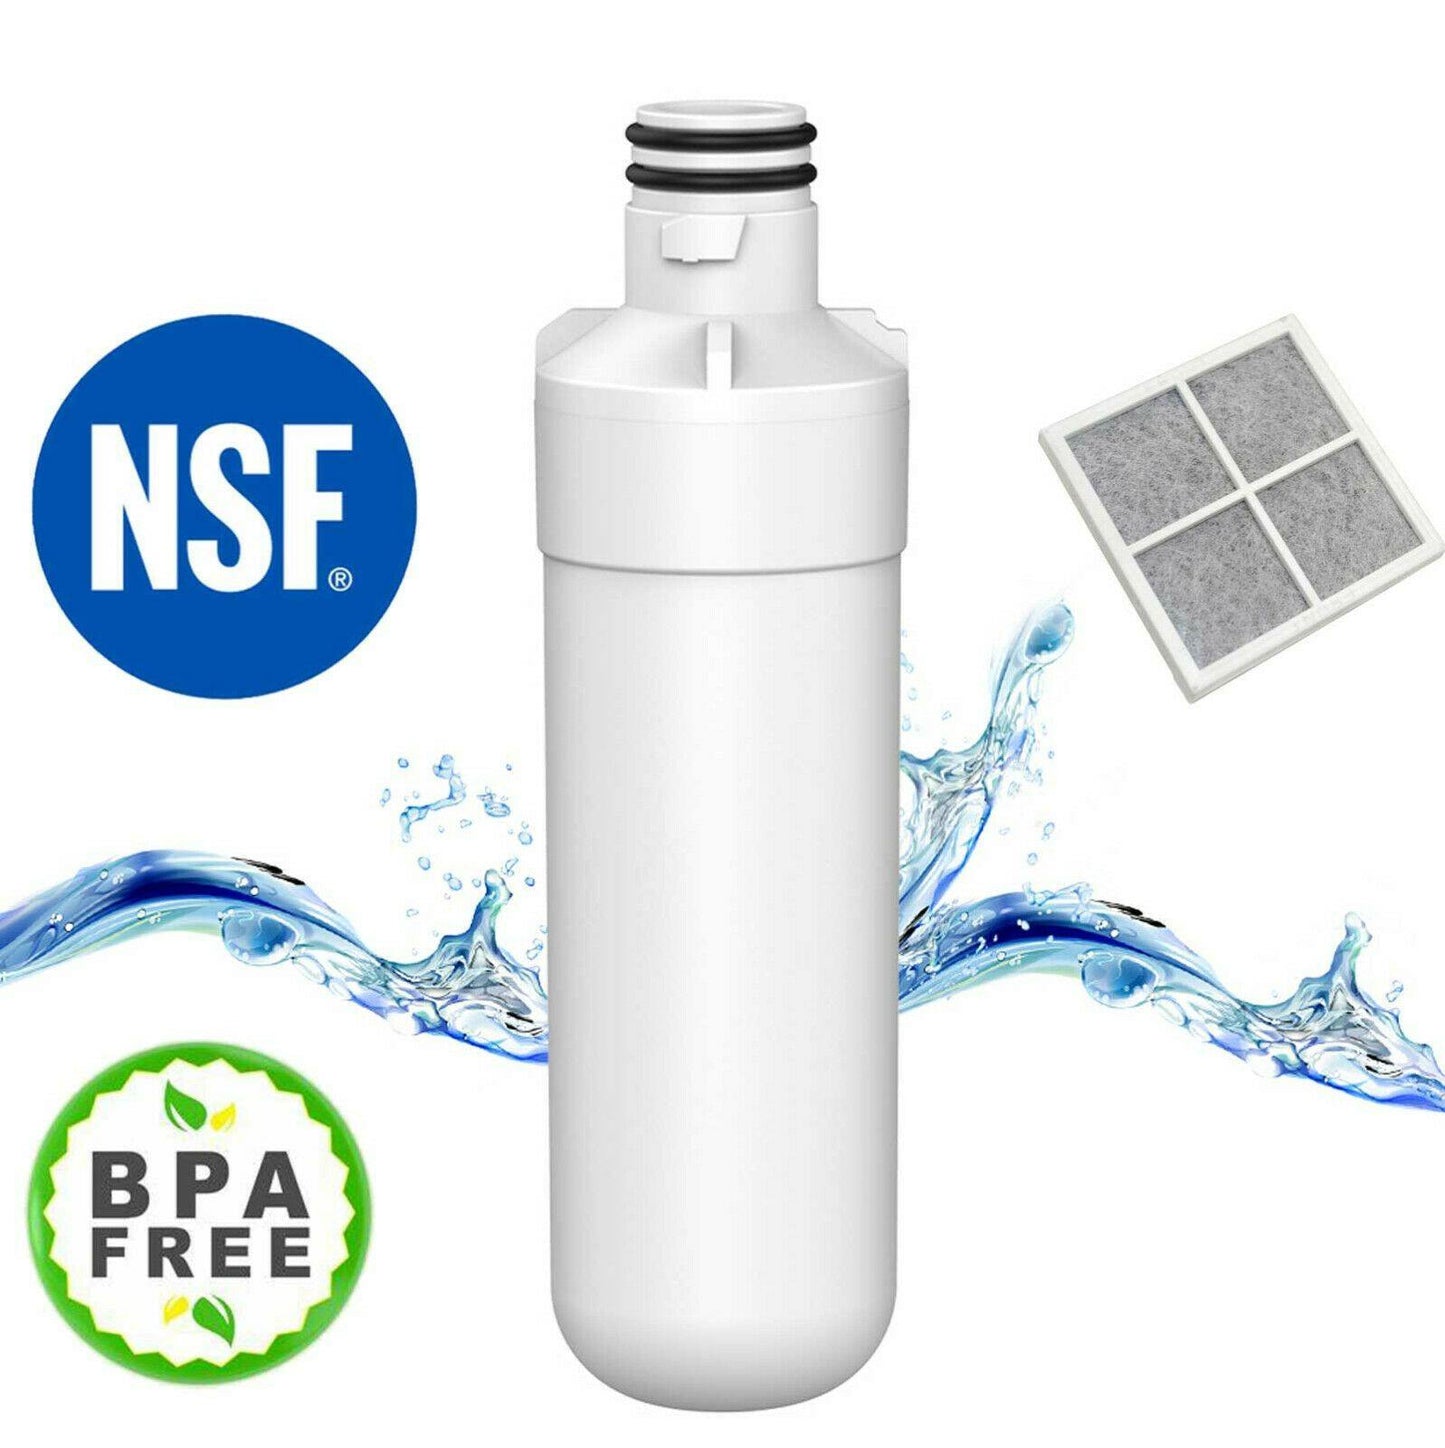 Fridge Water Filter For LG LT1000P MDJ64844601 ADQ74793501 with Air Filter Sparesbarn